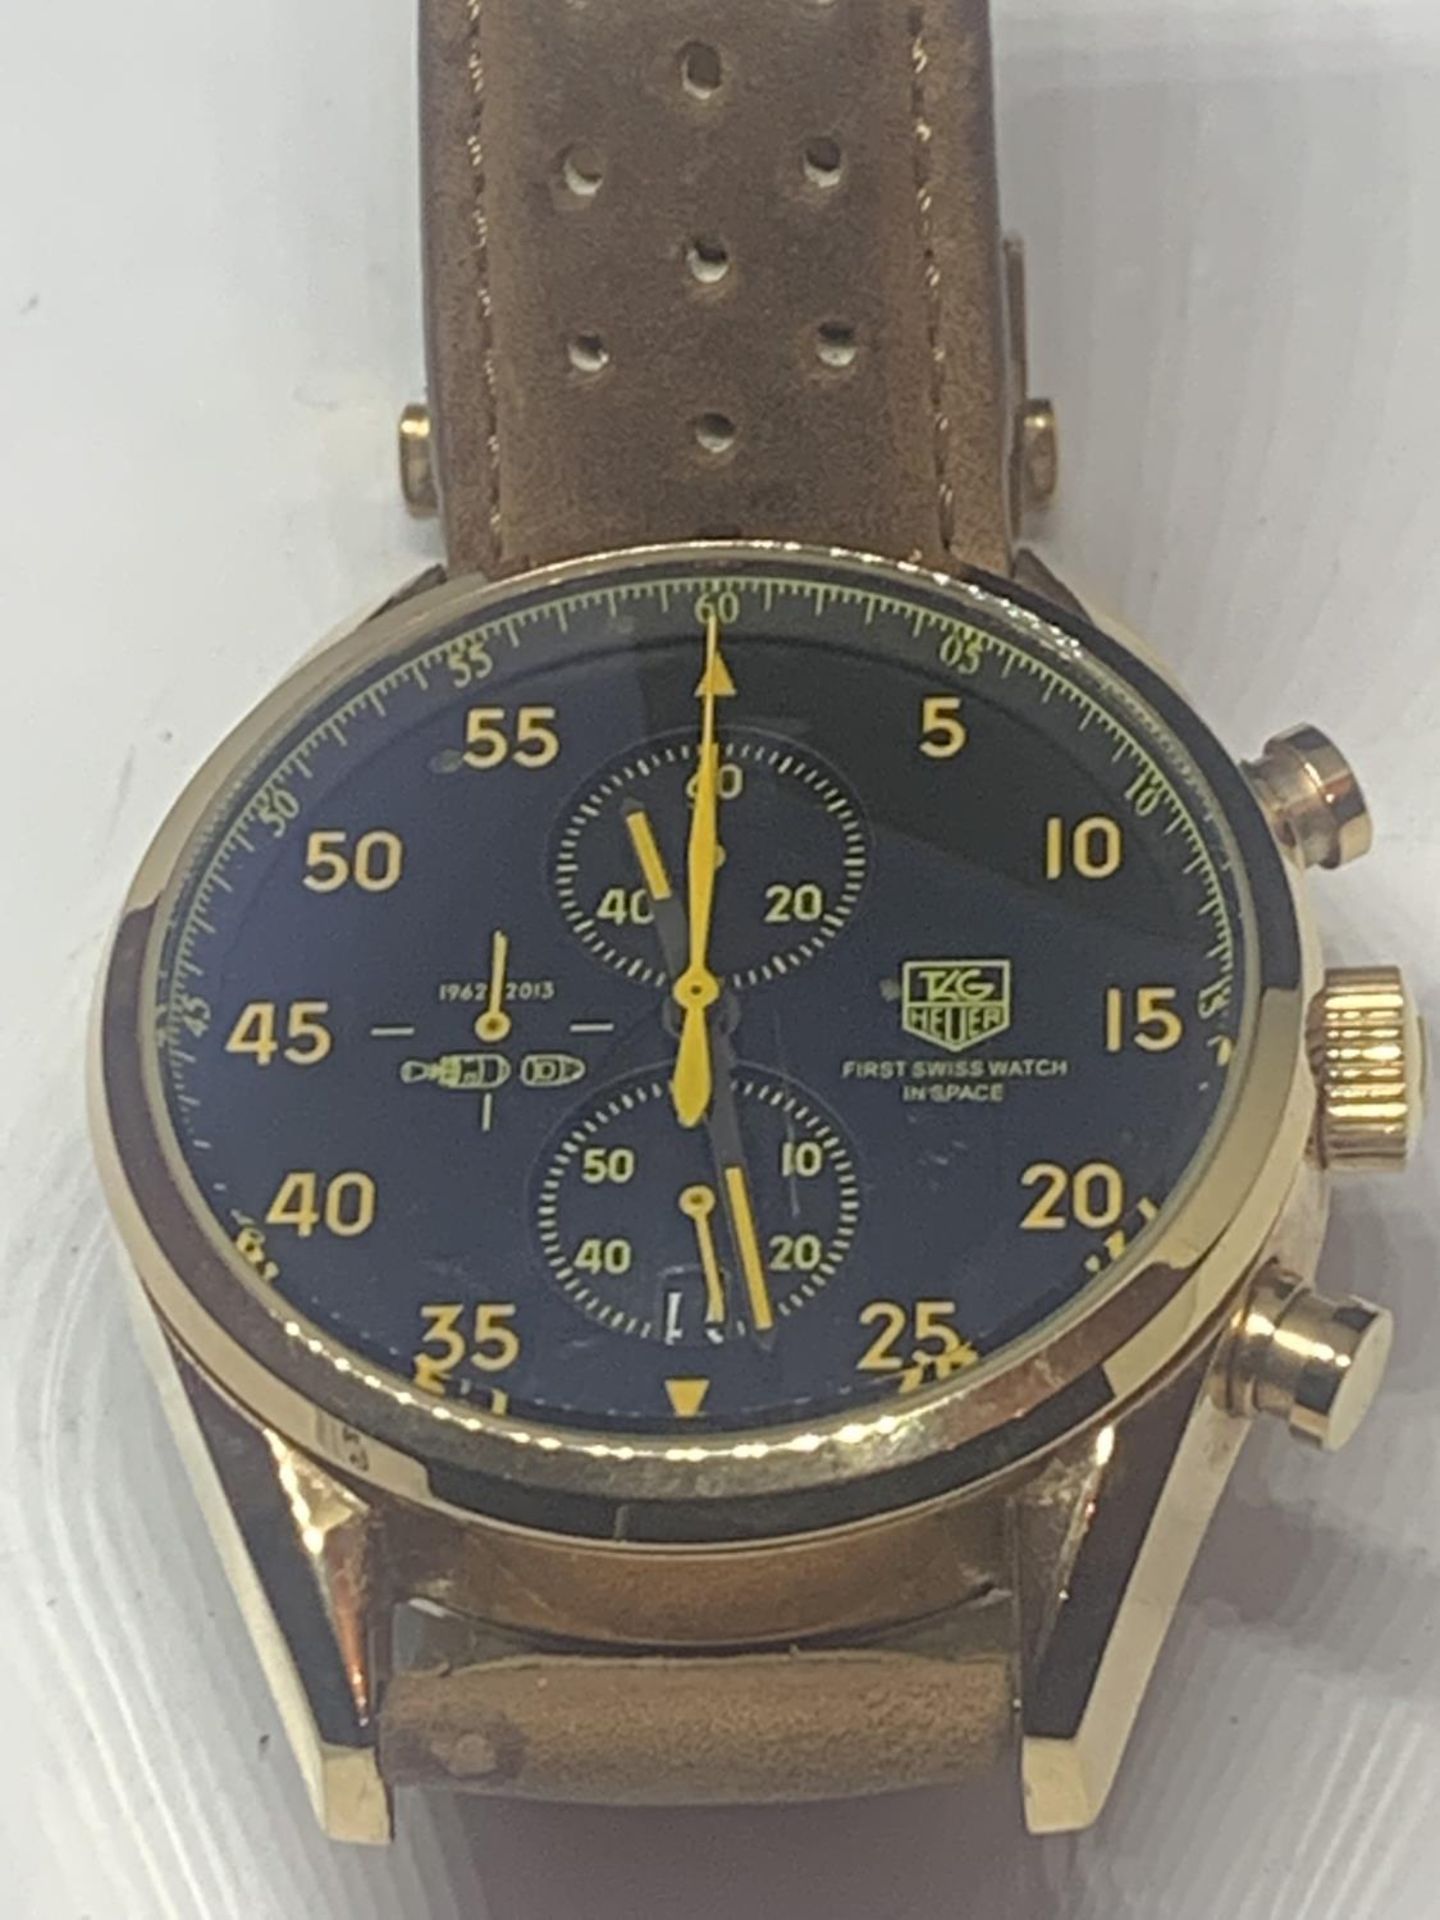 A GENTS FASHION WATCH WITH A BROWN LEATHER STRAP SEEN WORKING BUT NO WARRANTY - Image 2 of 3